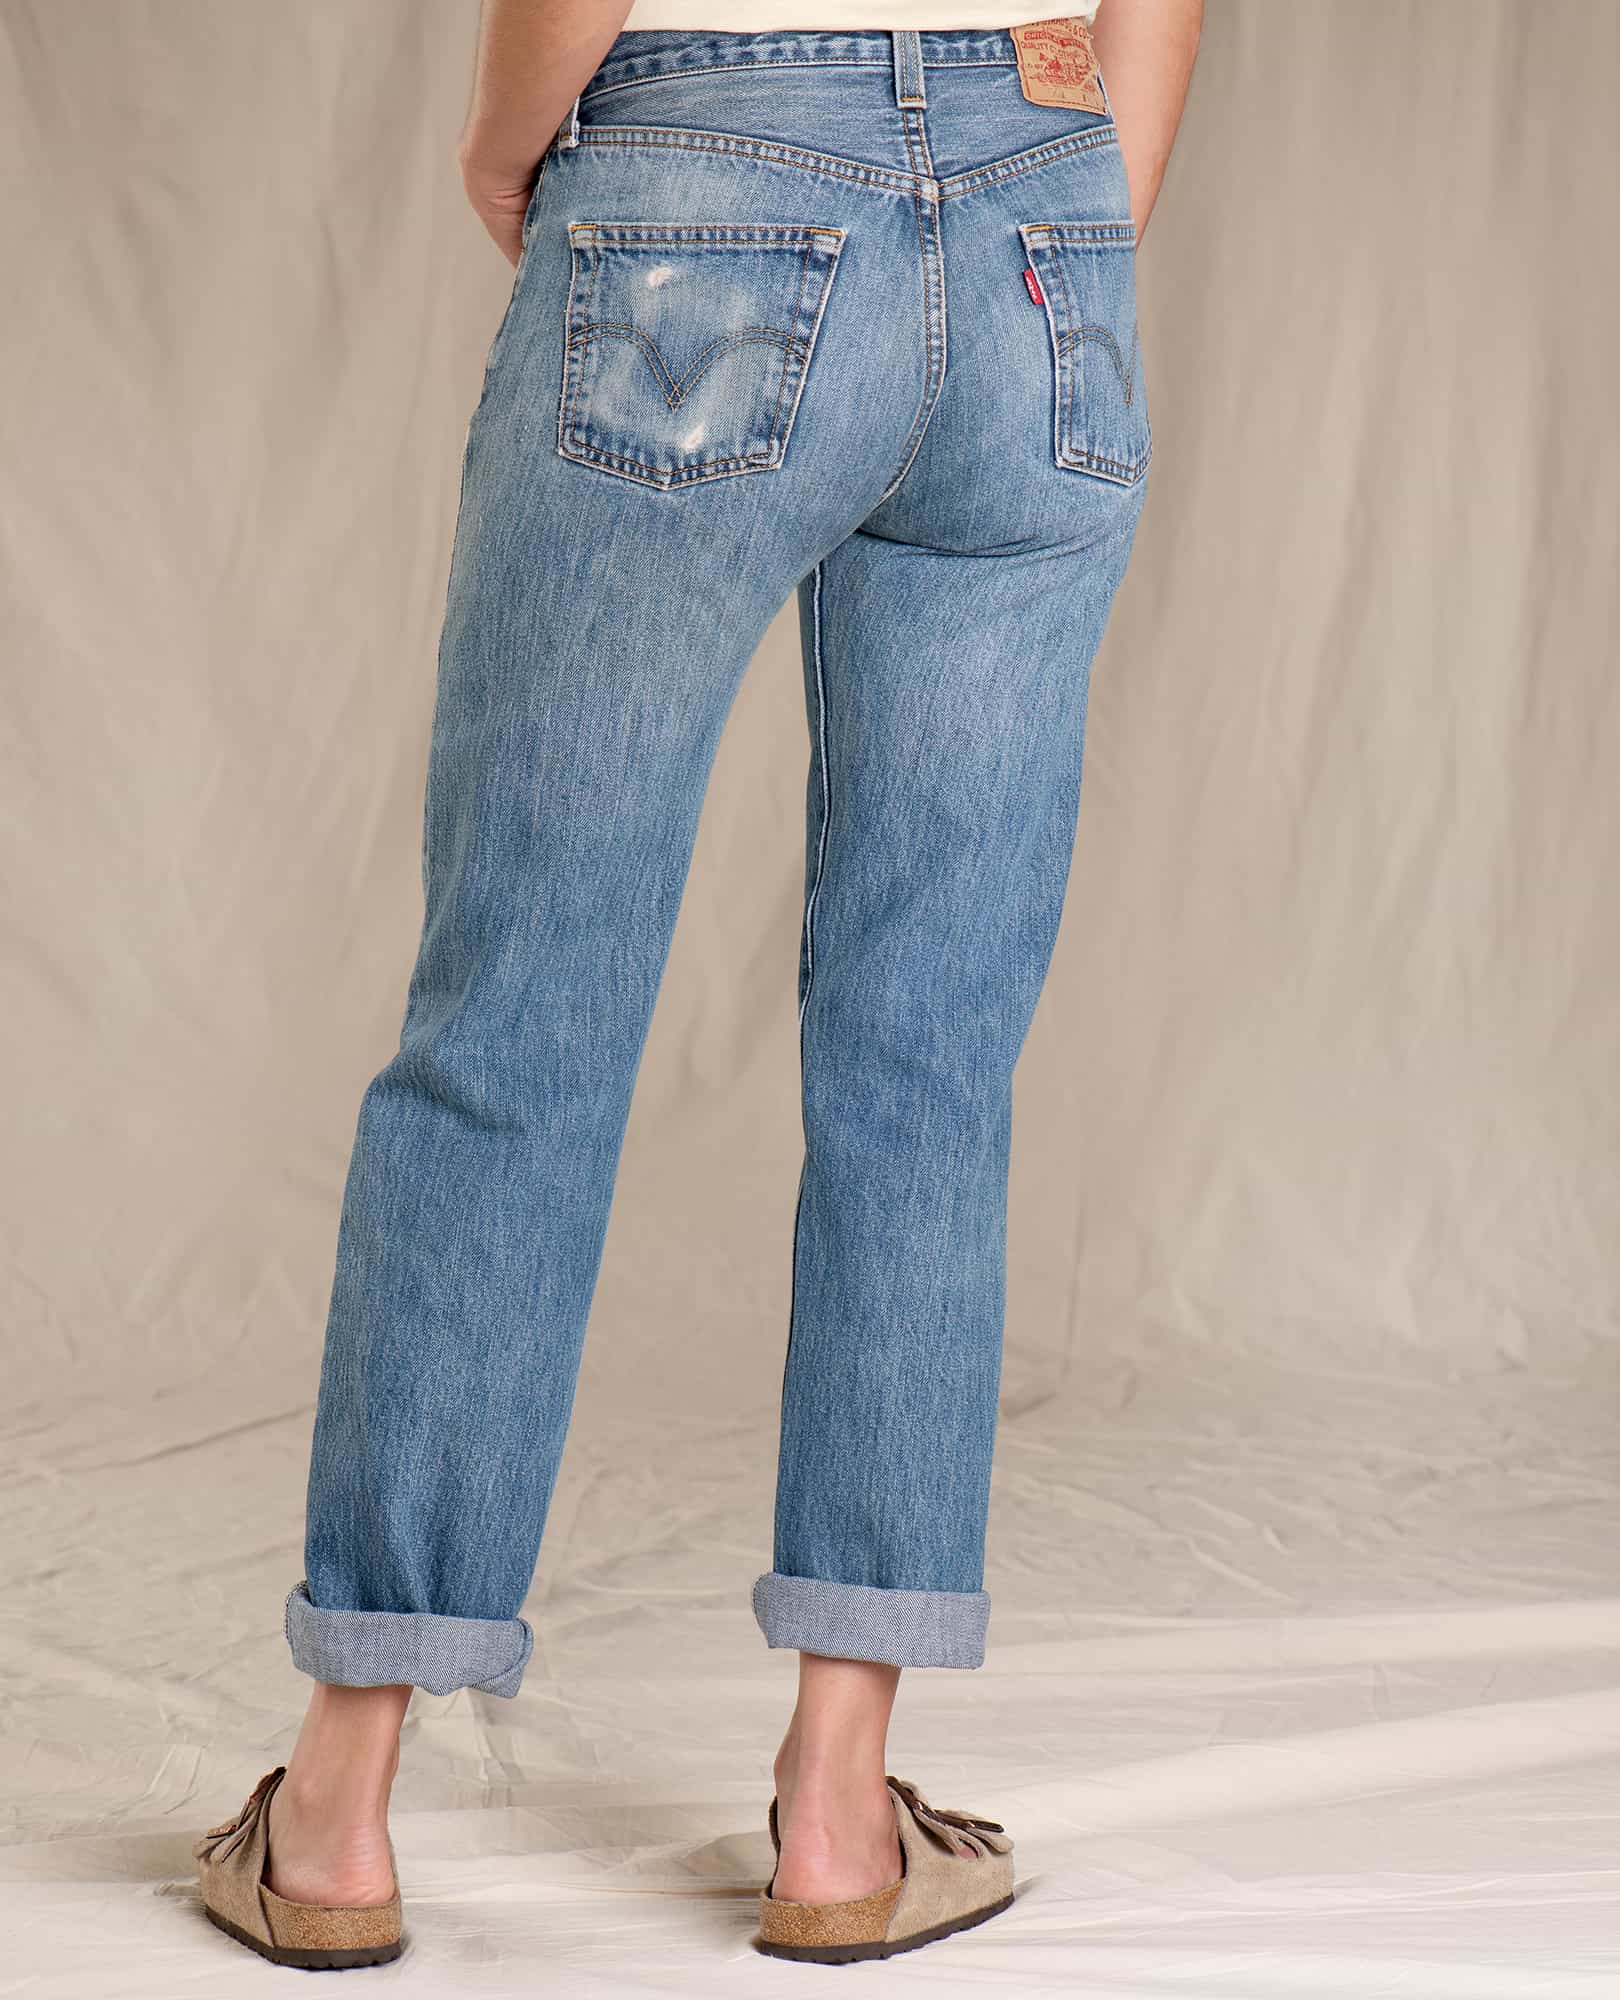 501 Jeans - Upcycled Denim Jeans 